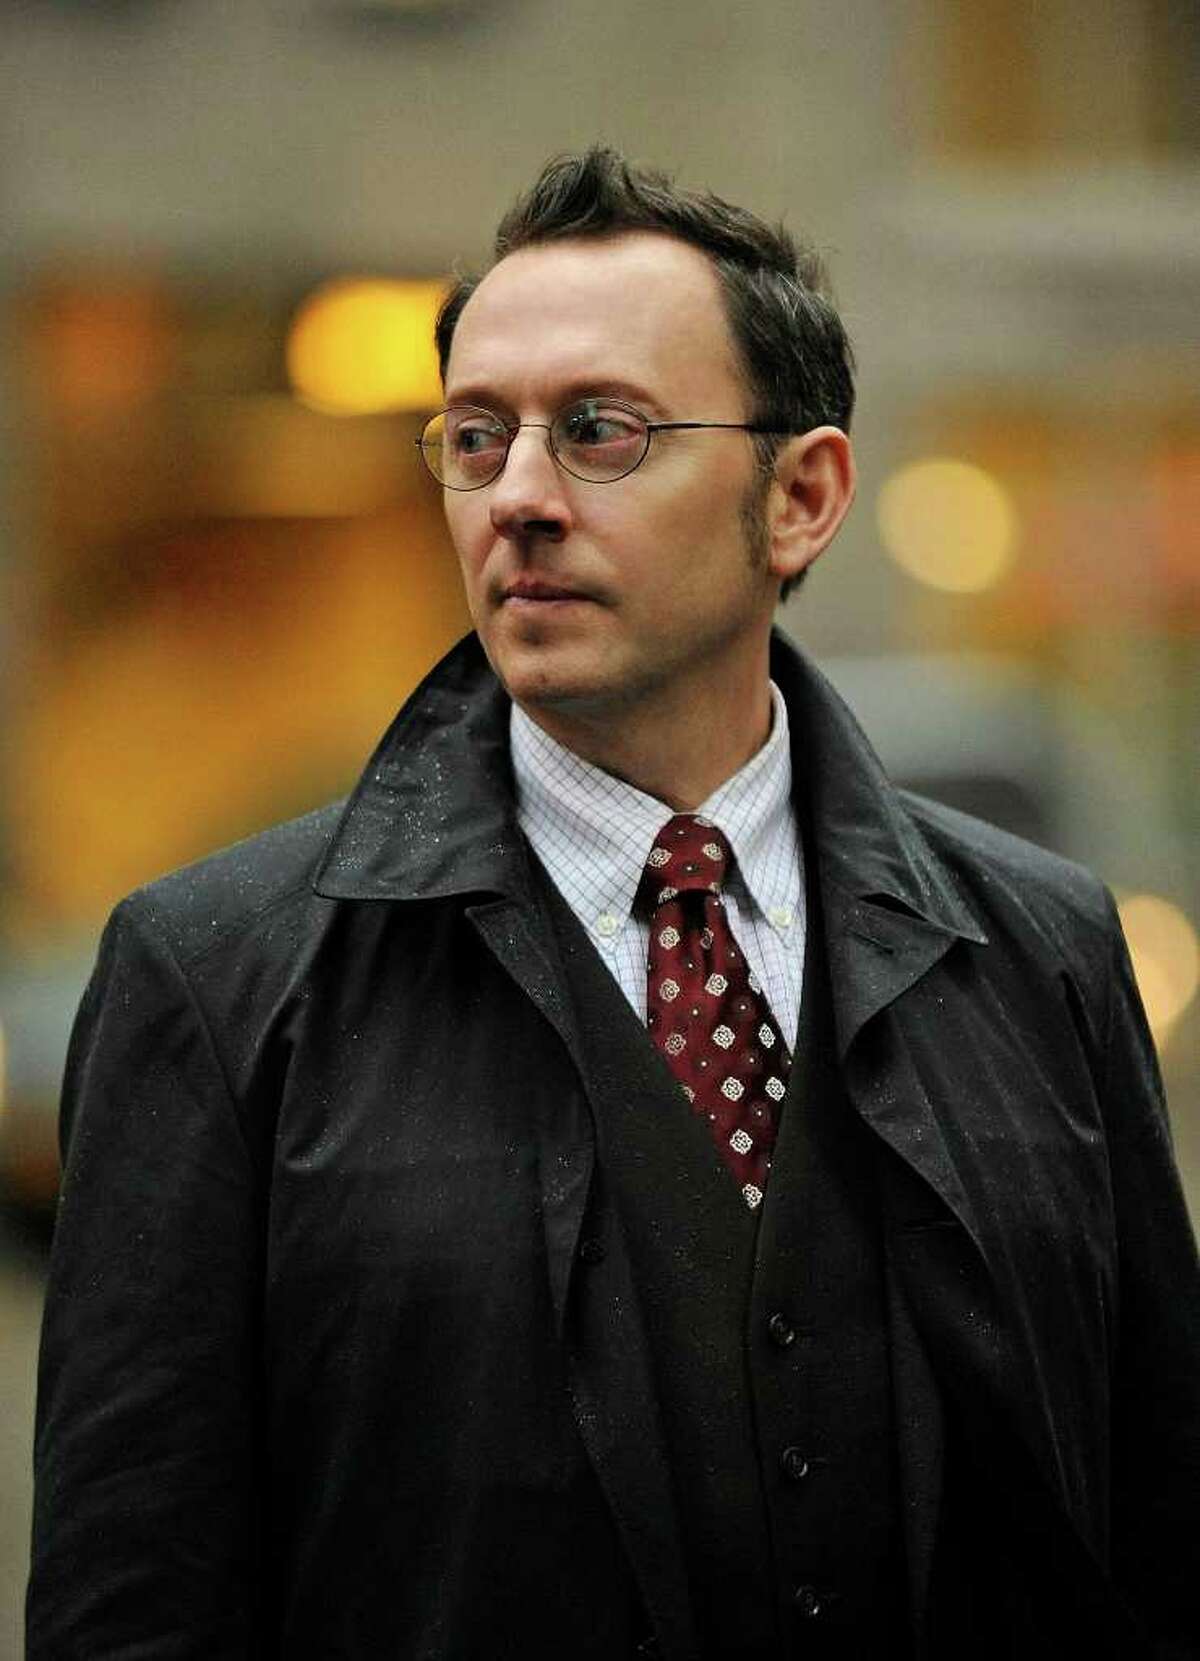 Jeffrey R. Staab : CBS Person of Interest: This new thriller stars Lost's Michael Emerson as a cryptic genius who has designed a computer program that predicts who will be involved in a crime before it is committed. He enlists a presumed-dead CIA agent (Jim Caviezel) to help him prevent the crimes. The series premieres at 8 p.m. Thursday on CBS.